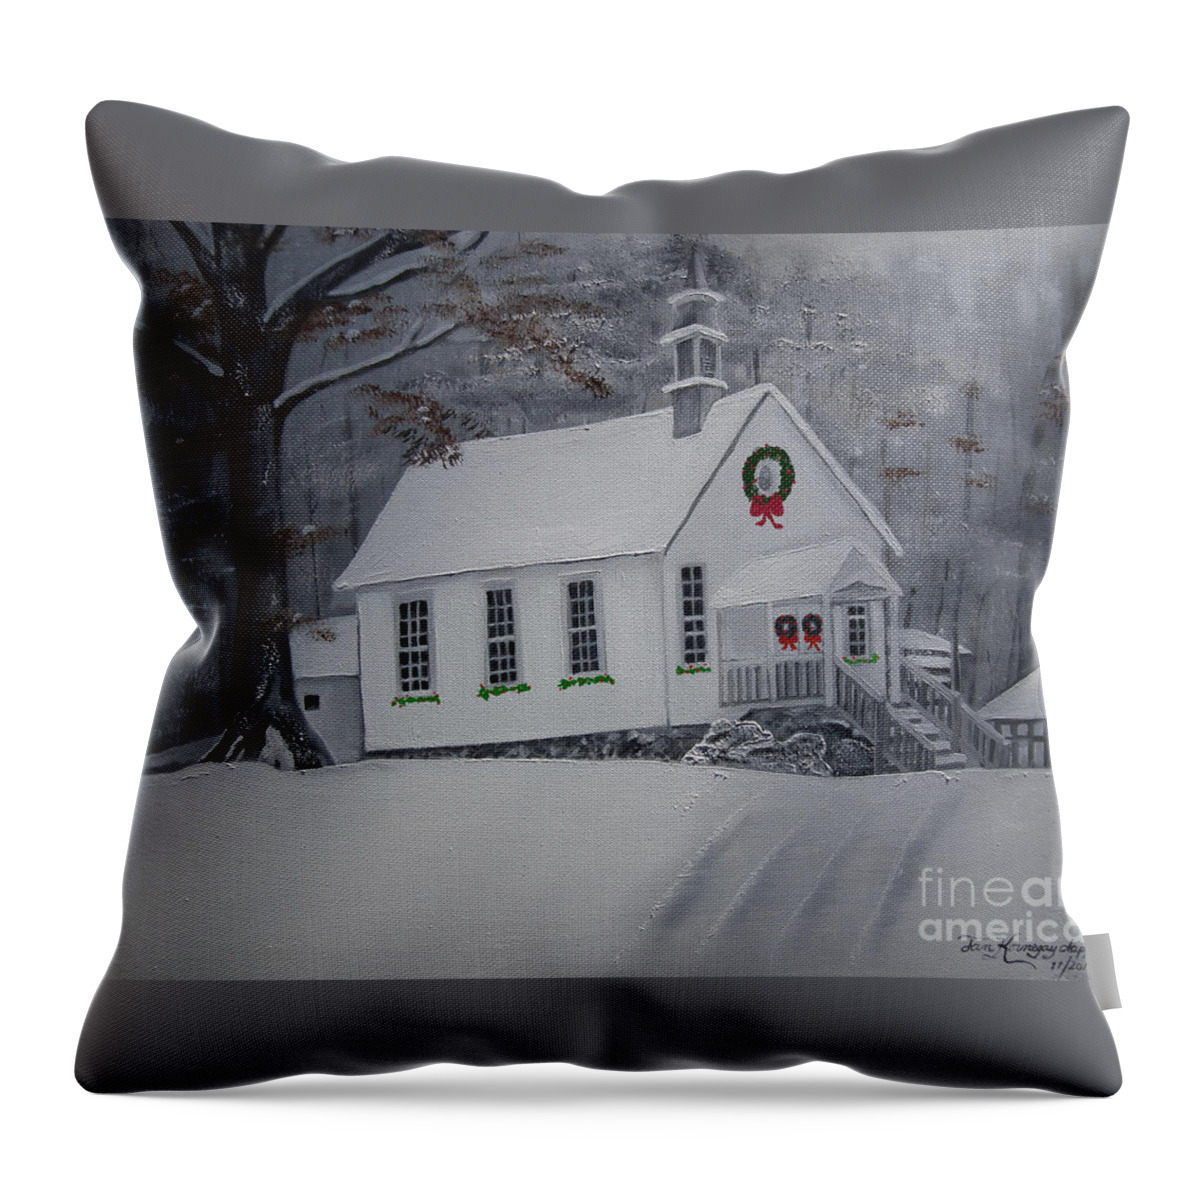 Christmas Throw Pillow featuring the painting Christmas Card - Snow - Gates Chapel by Jan Dappen